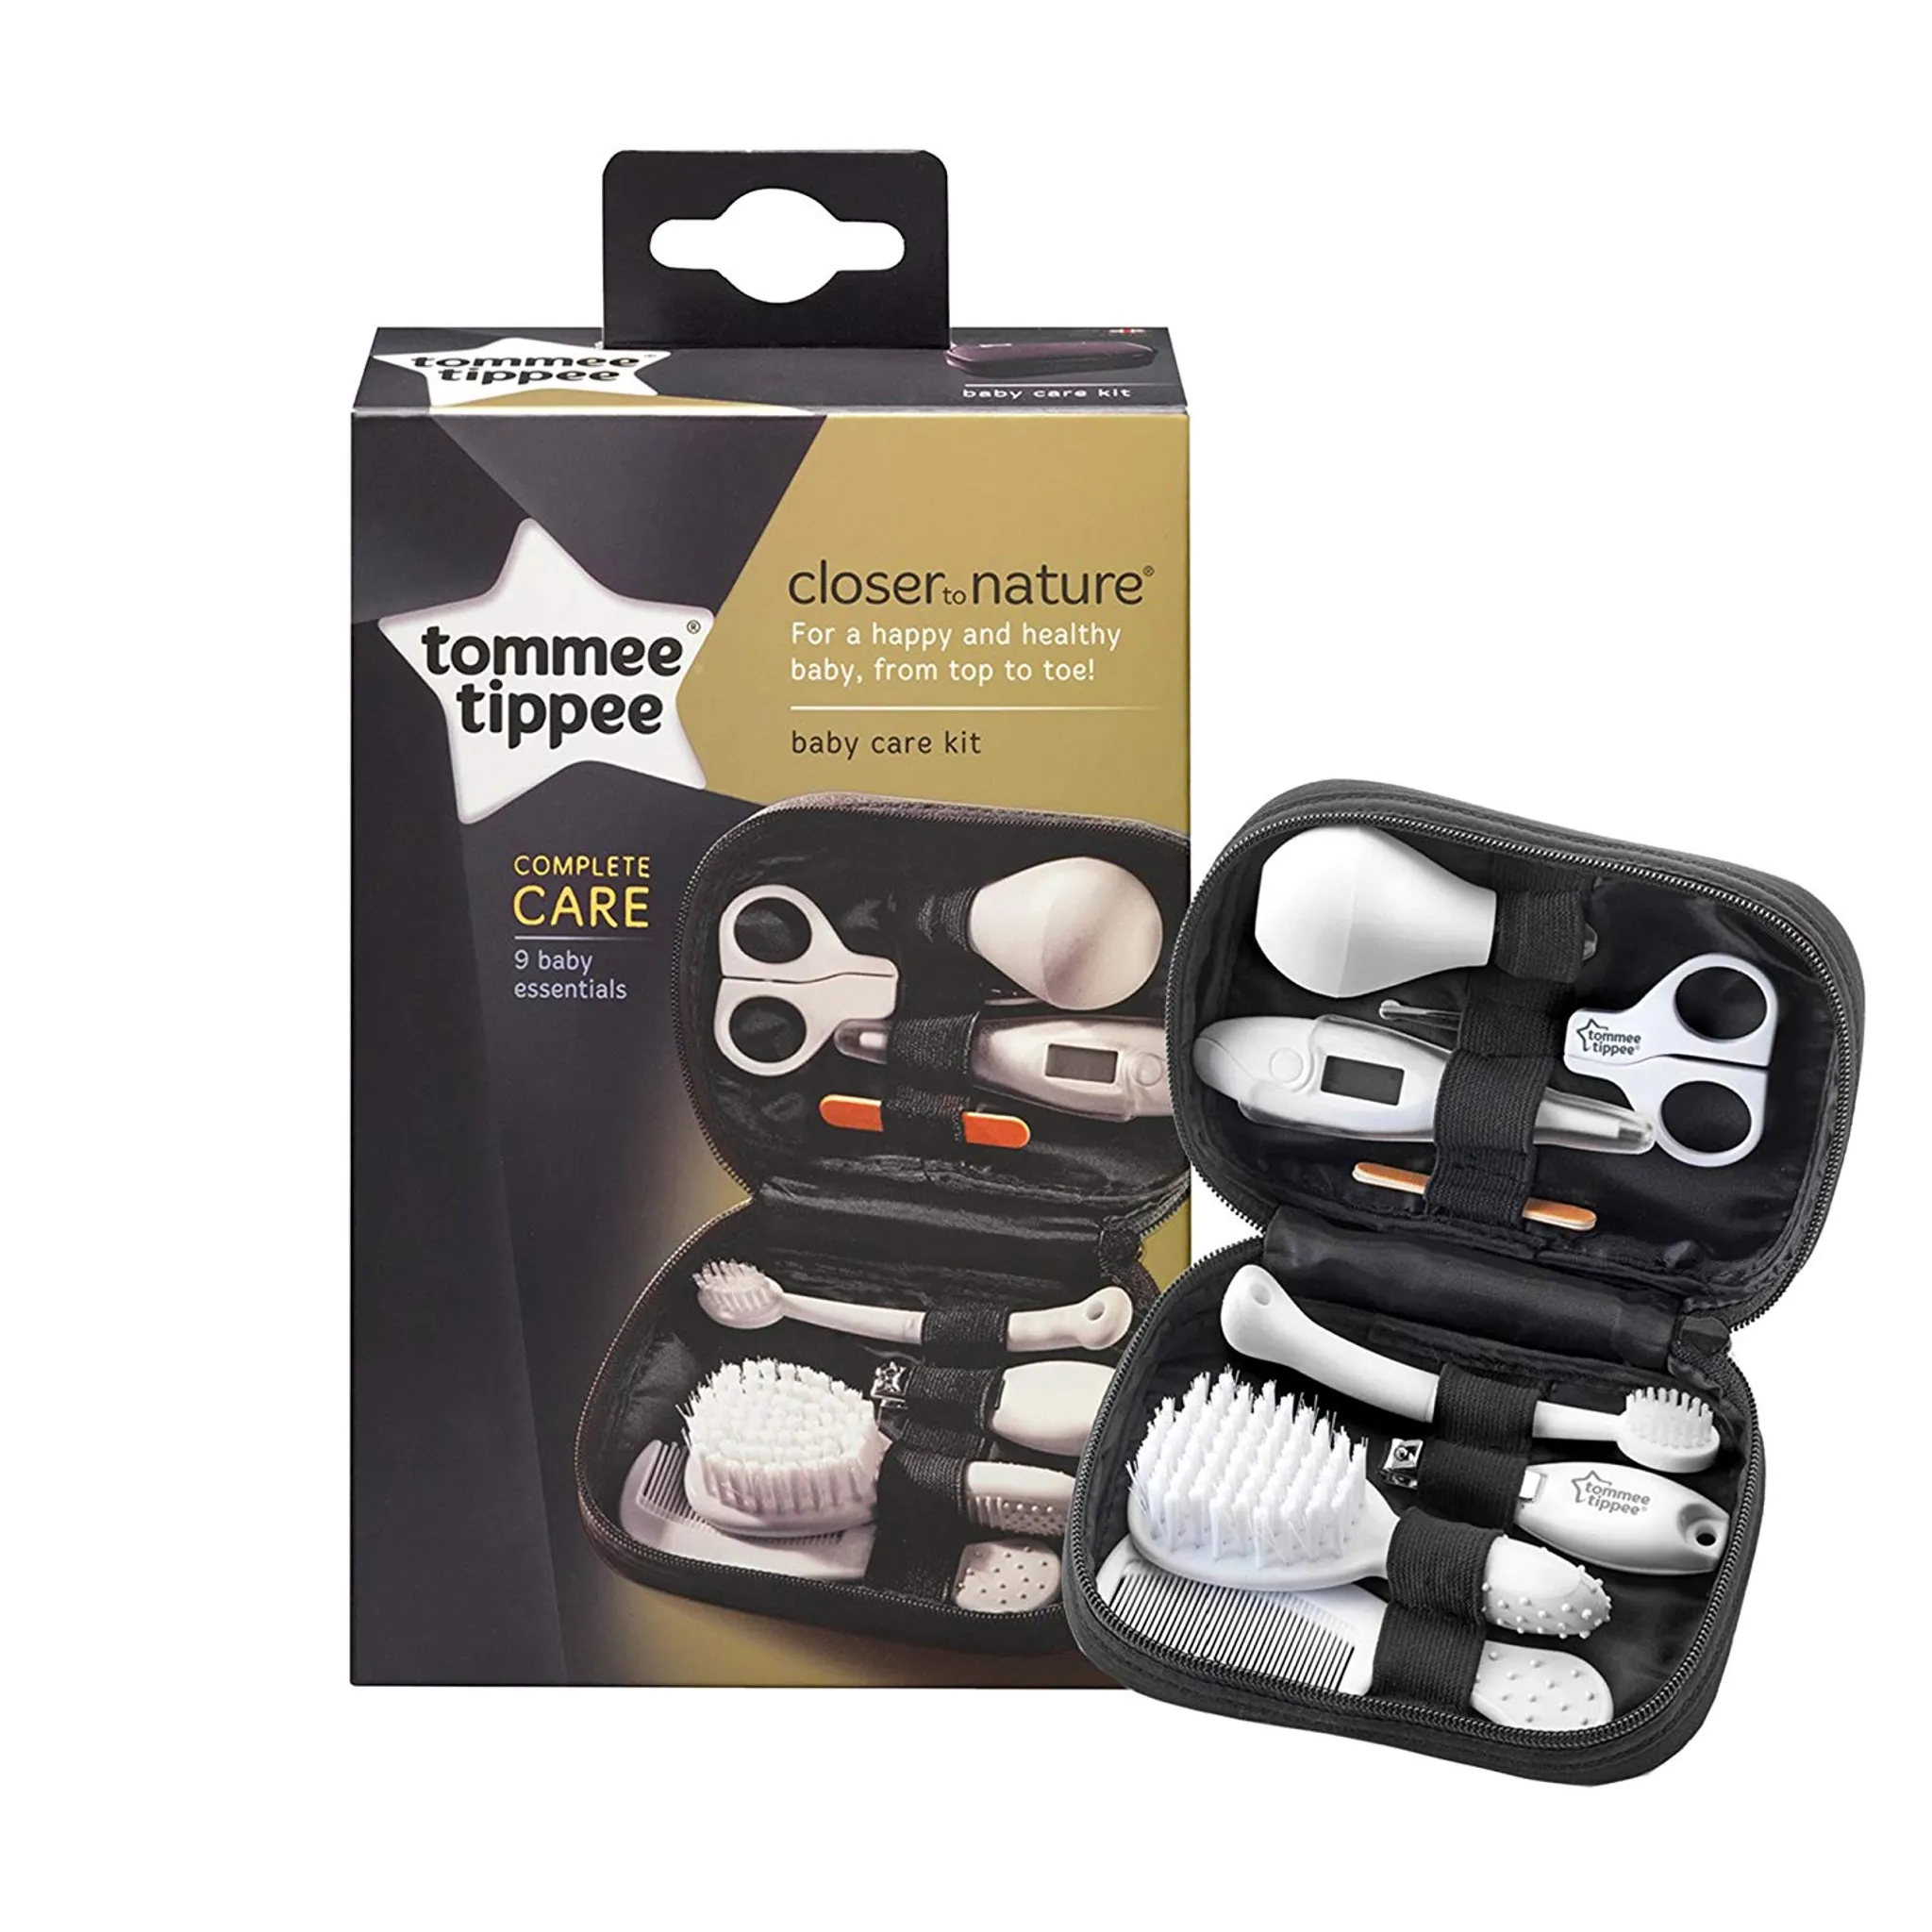 Tommee Tippee Baby Babypflegeset, to Closer